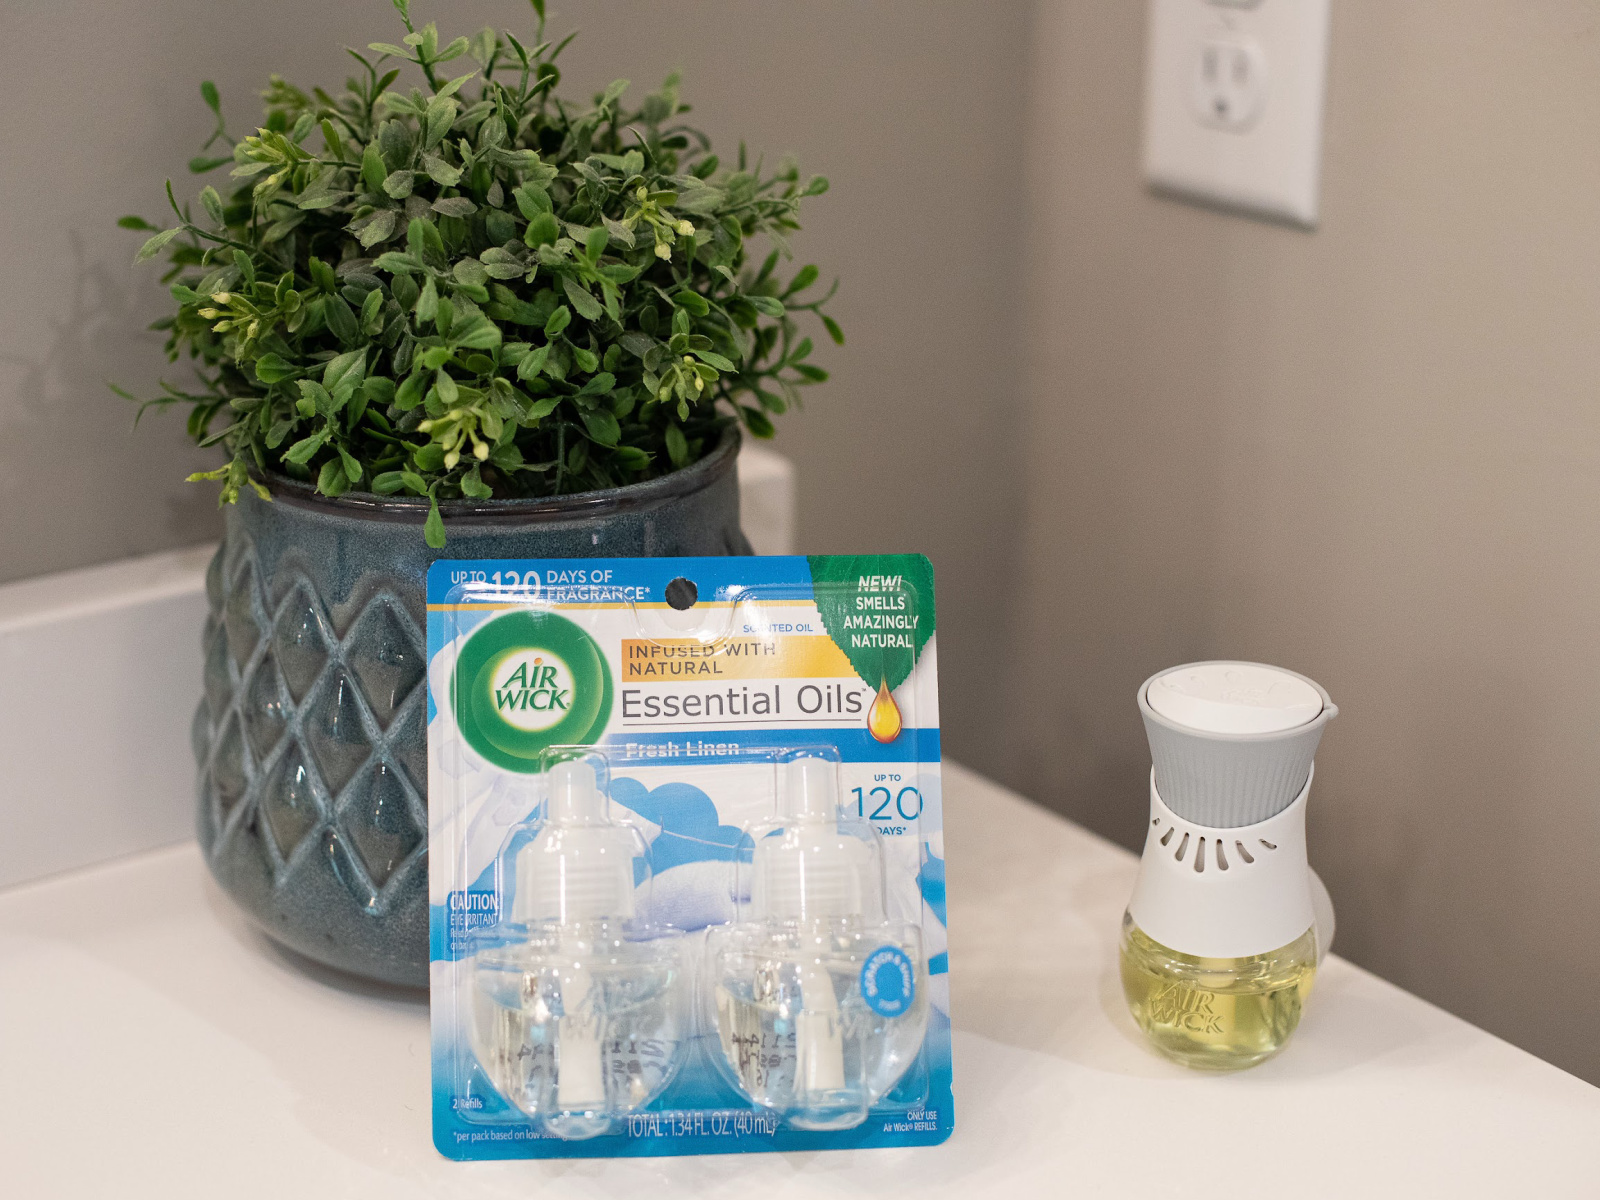 Air Wick Scented Oil Refills As Low As $1 At Publix (50¢ Per Refill) – Today Only